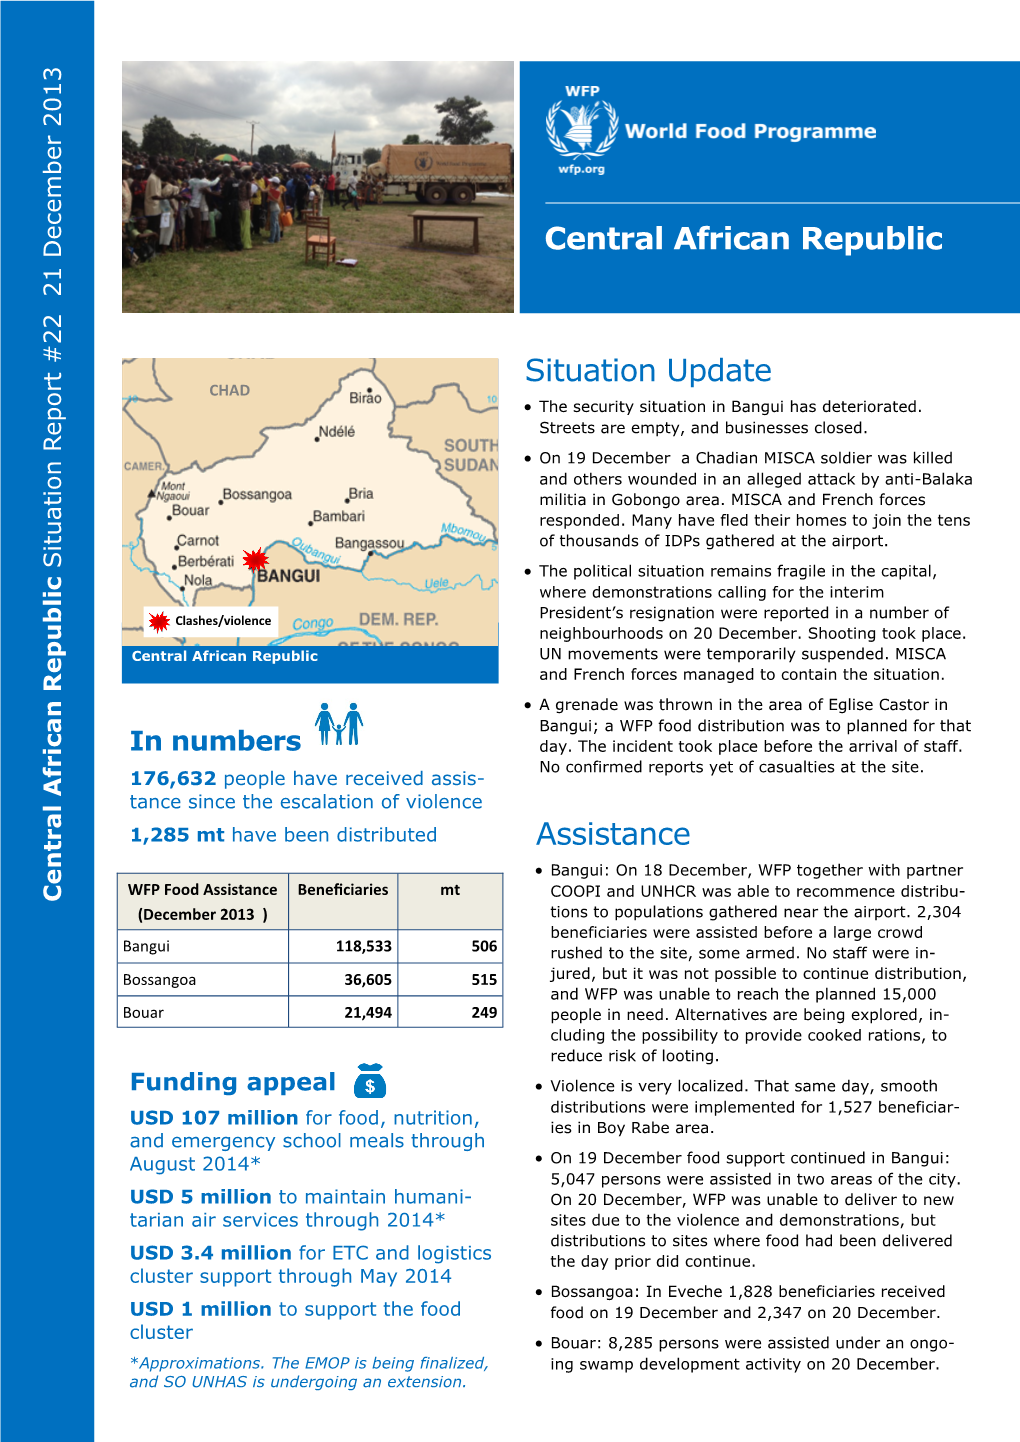 Central African Republic Situation Report #22 21 December 2013 Bouar Bossangoa Bangui WFP Food Assistance Assistance WFP Food and Sois Undergoing an UNHAS Extension